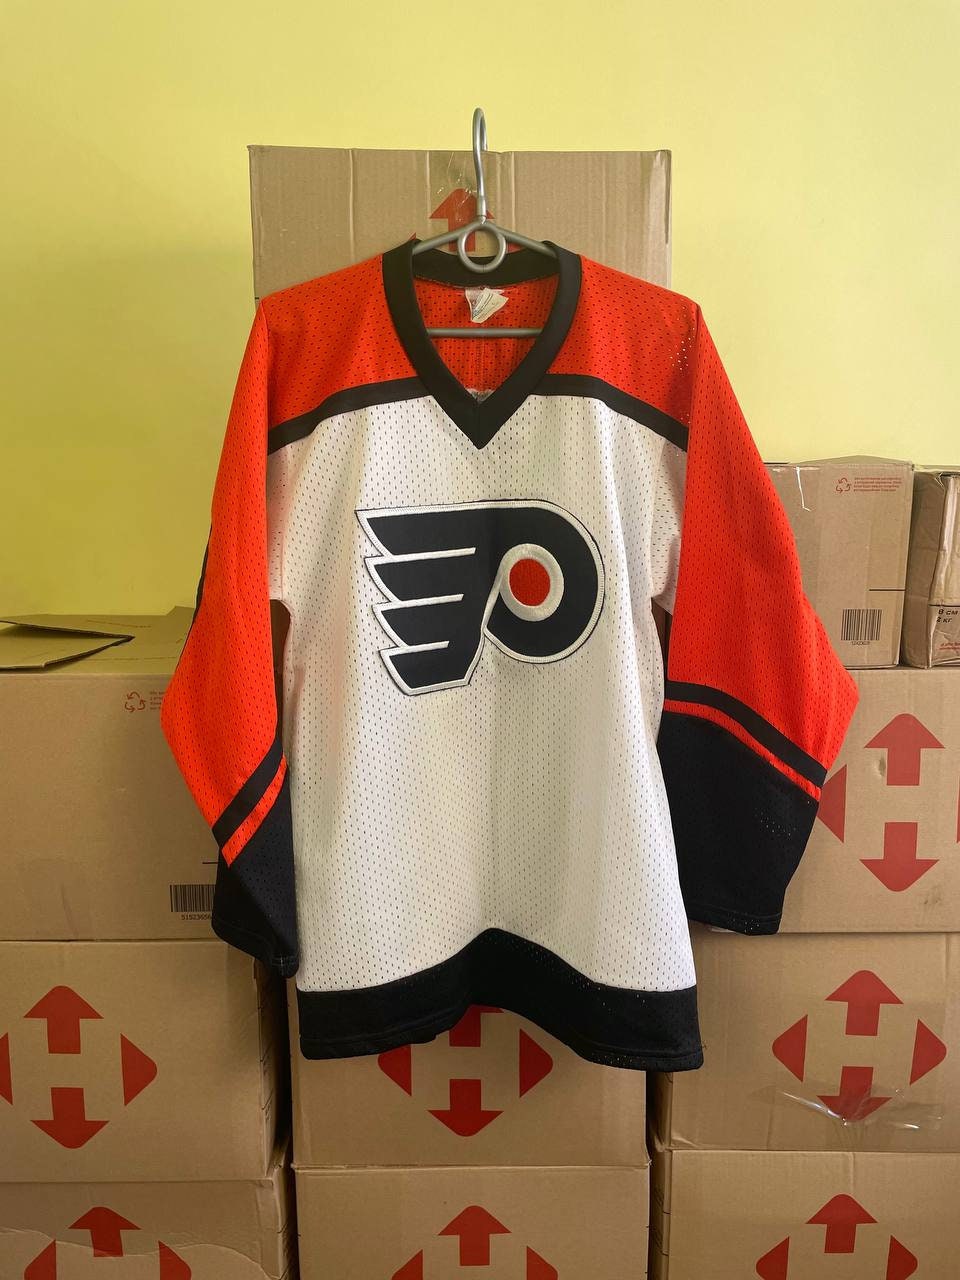 NHL 1970's All Star CCM Throwback Orange Jersey Customized Any Name &  Number(s) - Custom Throwback Jerseys